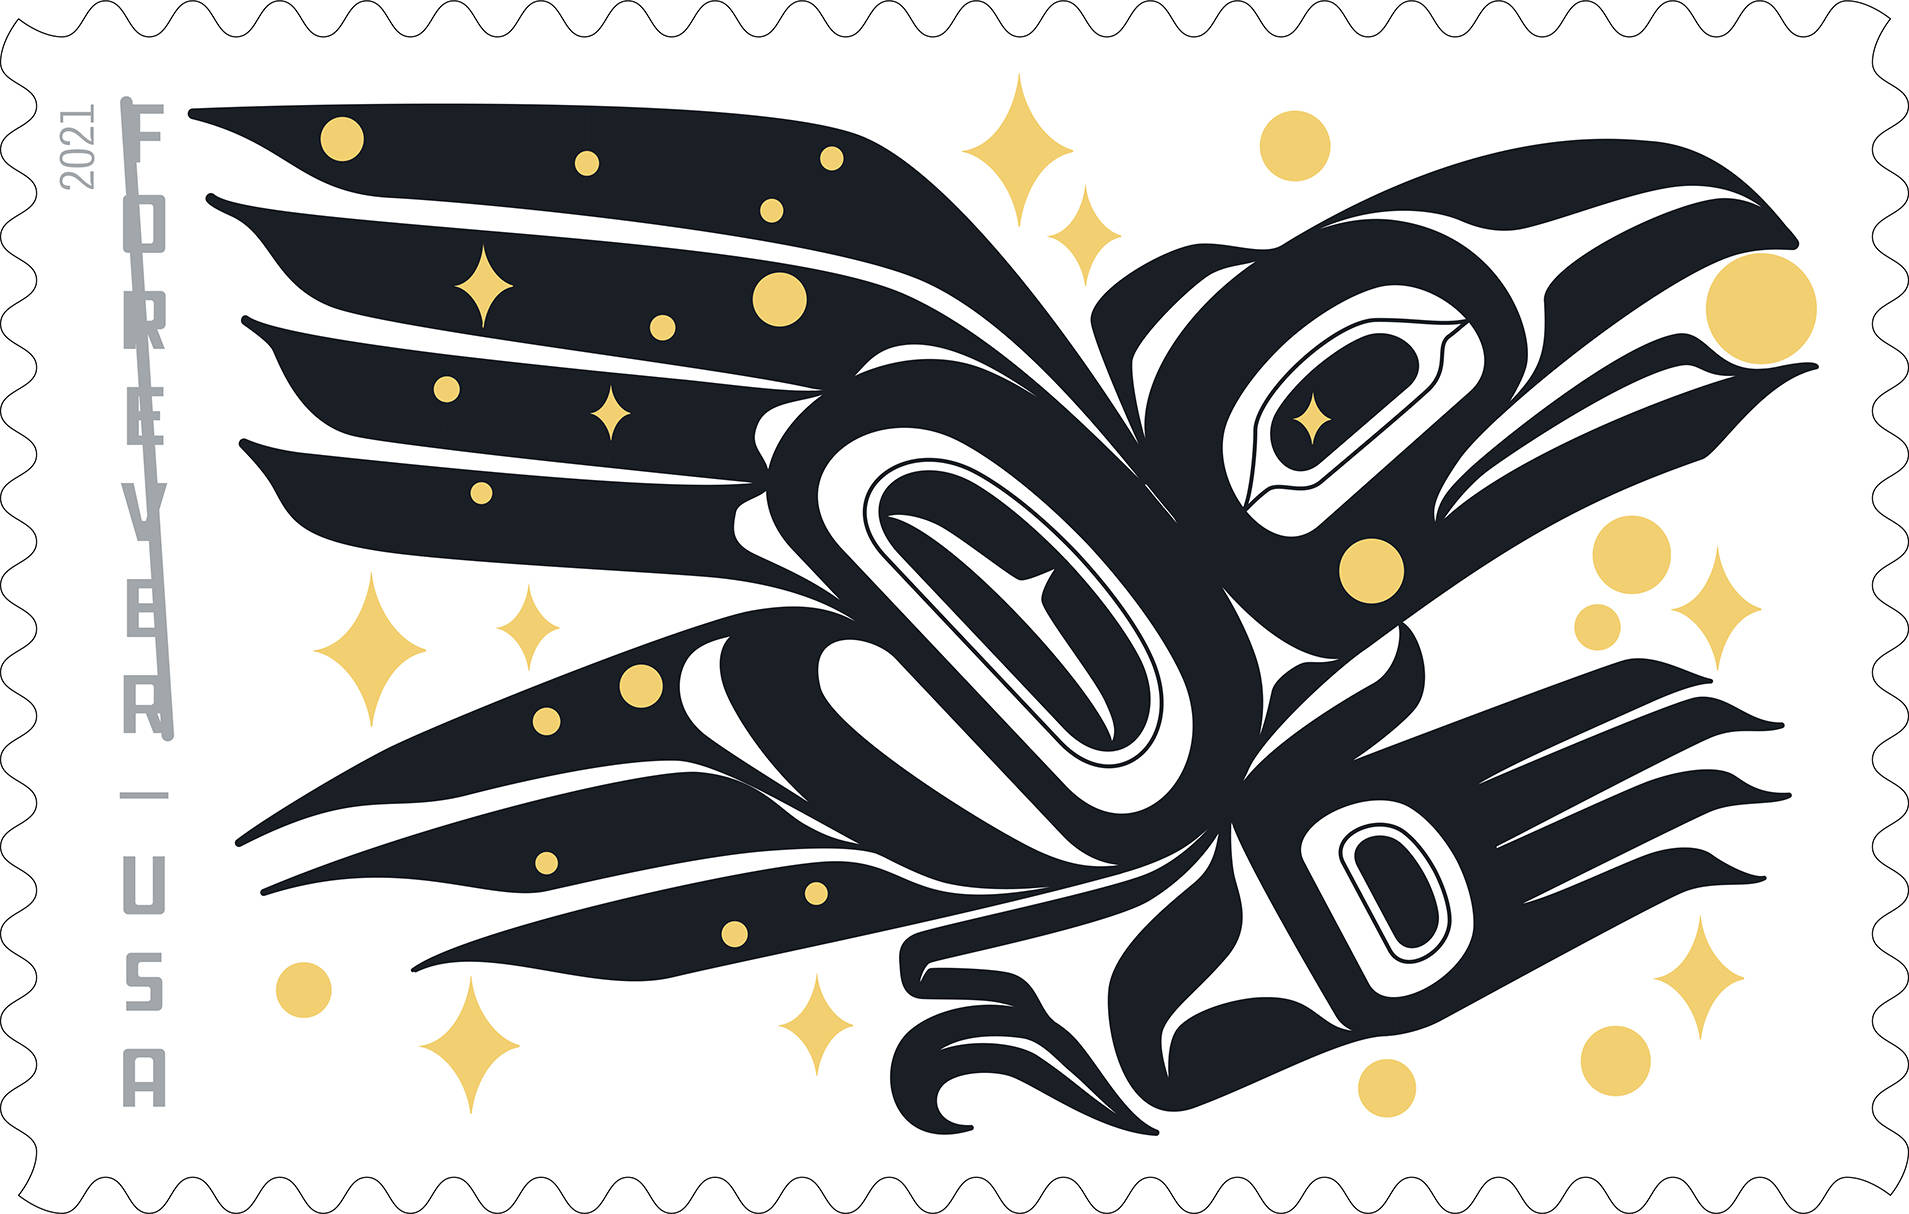 Rico Lanáat’ Worl’s design ‘Raven Story,’ shown here, is thought to be the first Tlingitp-designed art to be featured on a stamp, available beginning in 2021. (Courtesy Image / Sealaska Heritage Institute)